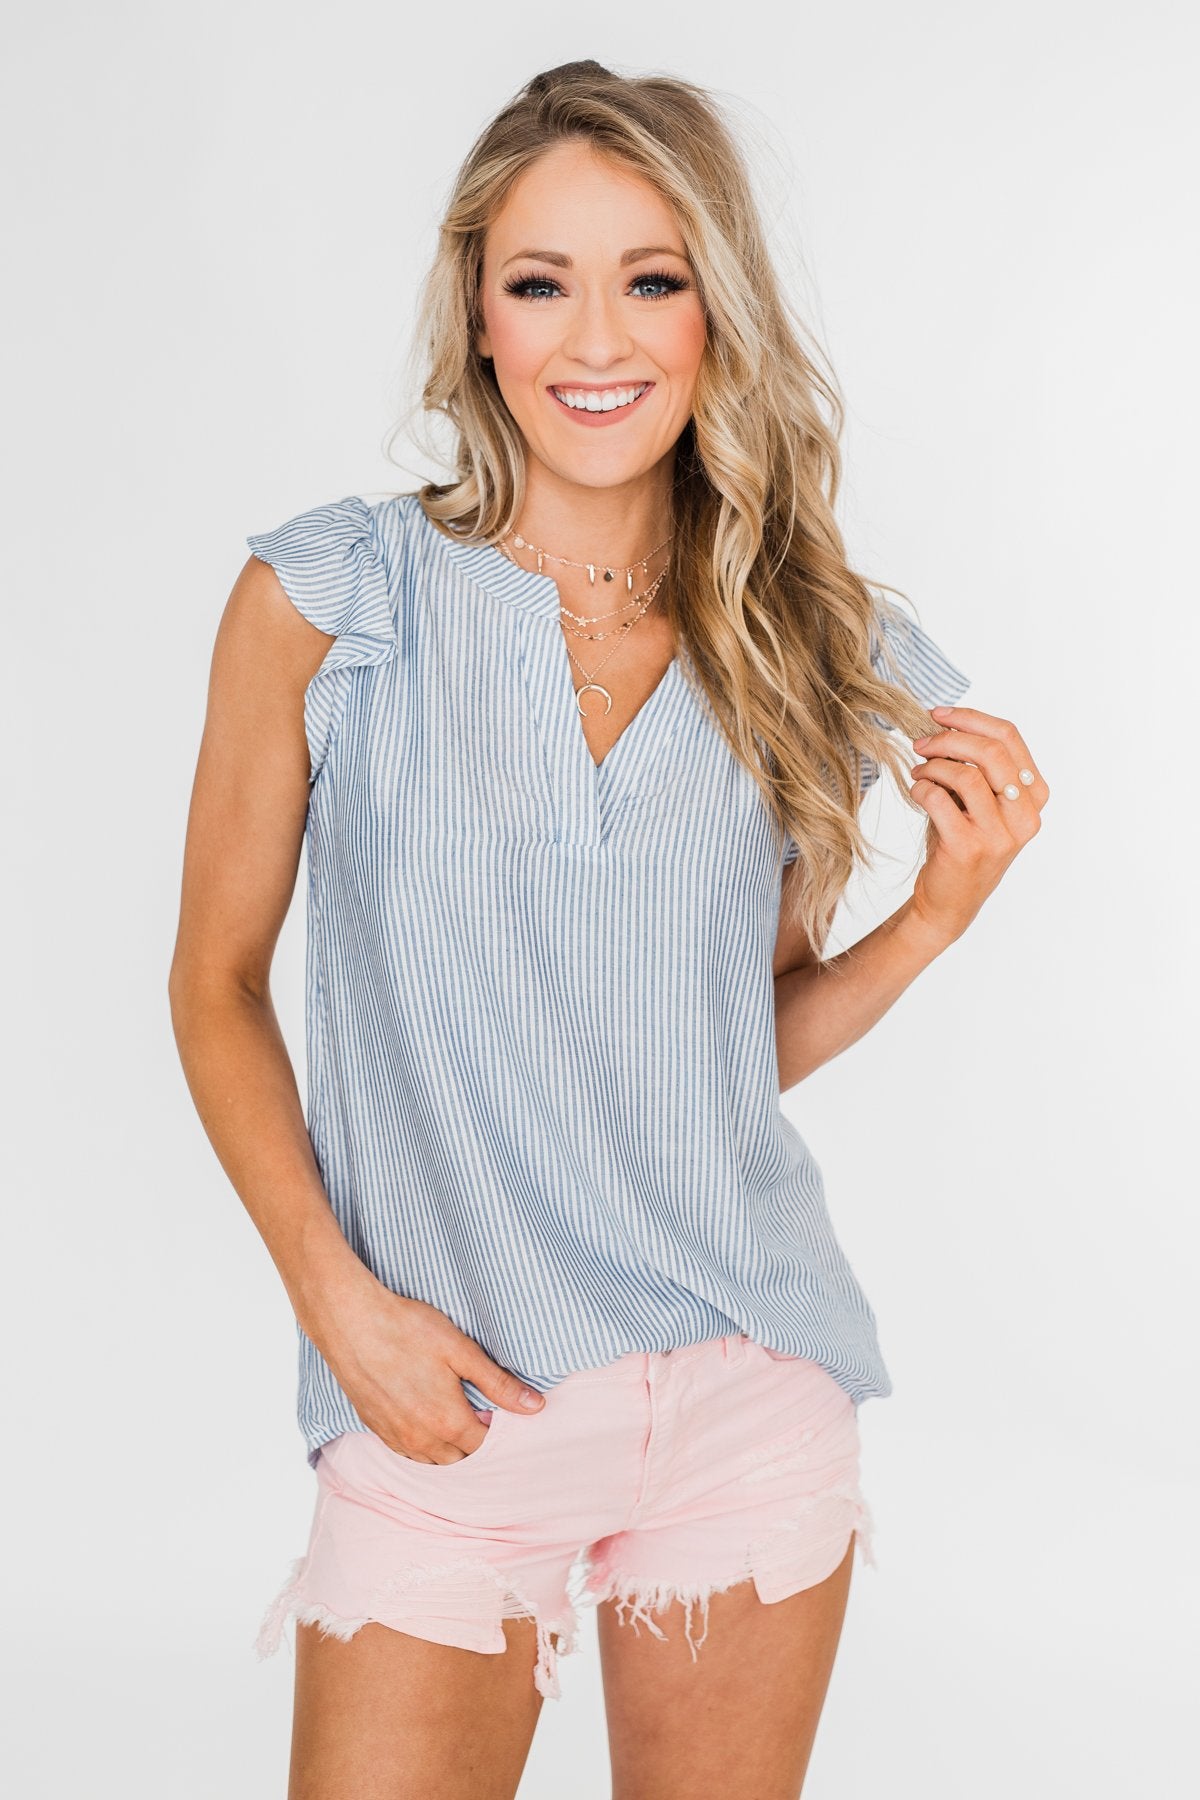 Ruffled Over You Striped Tank Top- Light Blue & Ivory